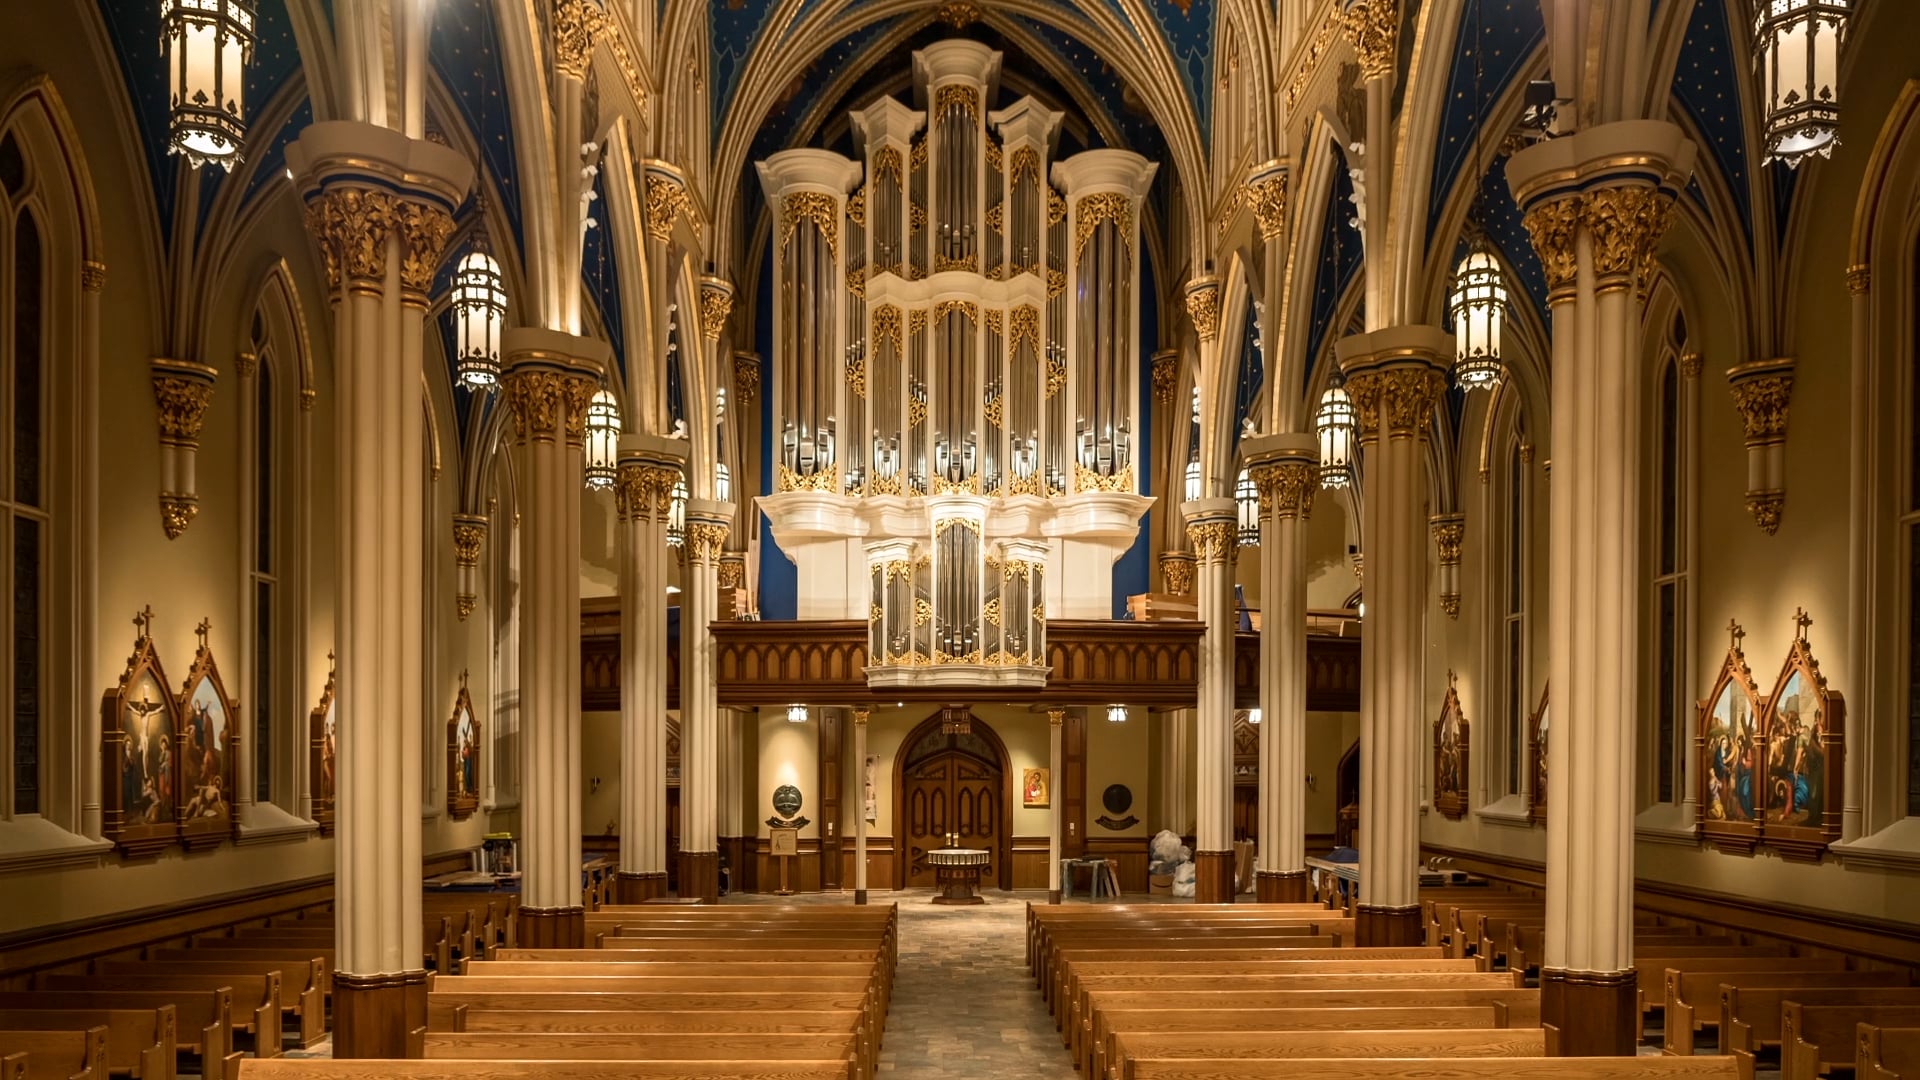 Timelapse of the installation of the Murdy Family Organ in the Basilica of the Sacred Heart at the University of Notre Dame.